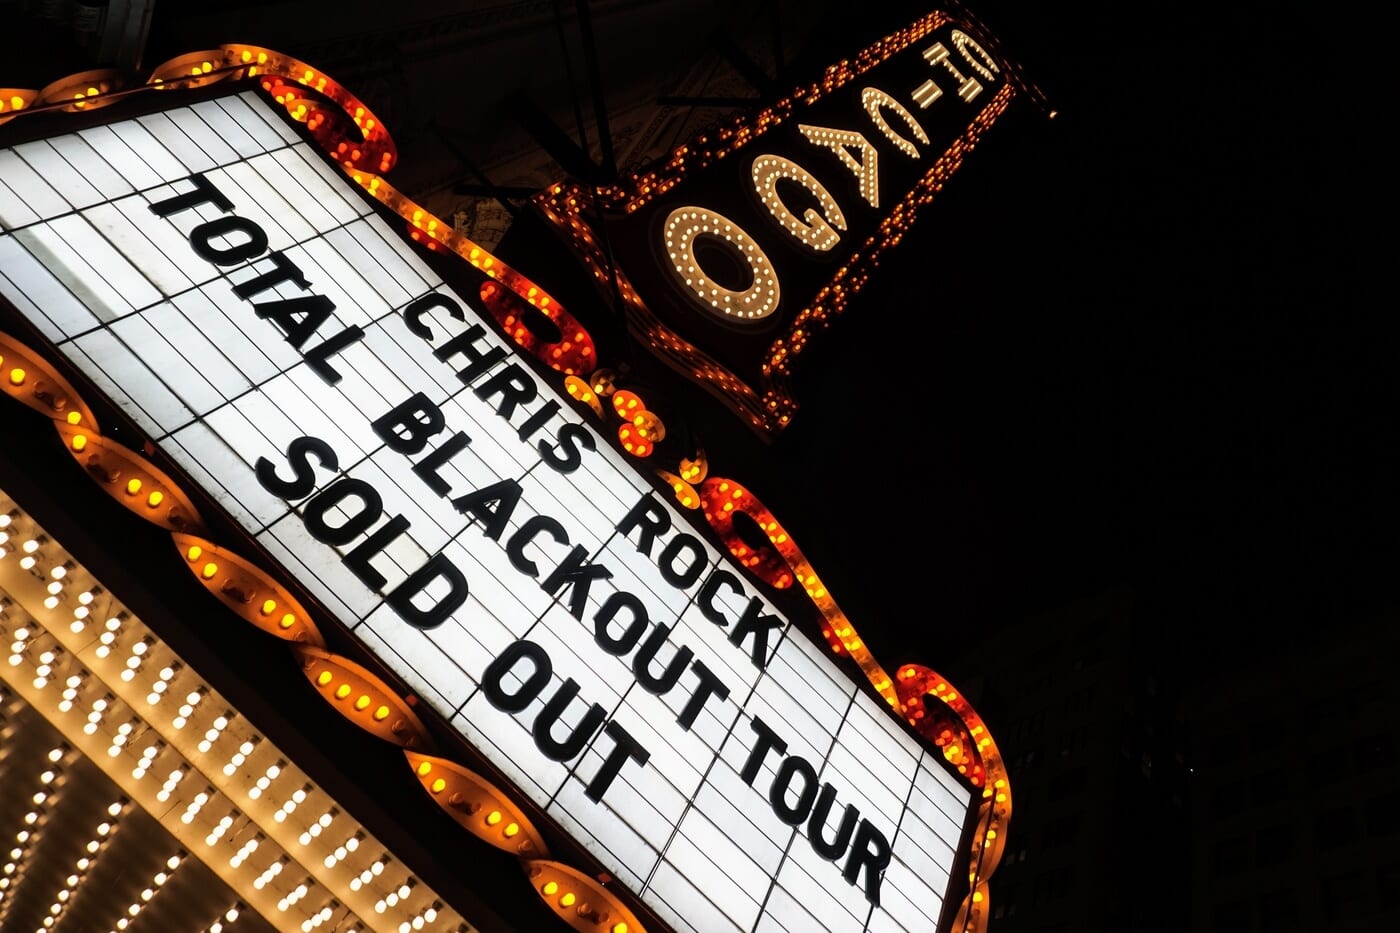 Chris Rock show marquee